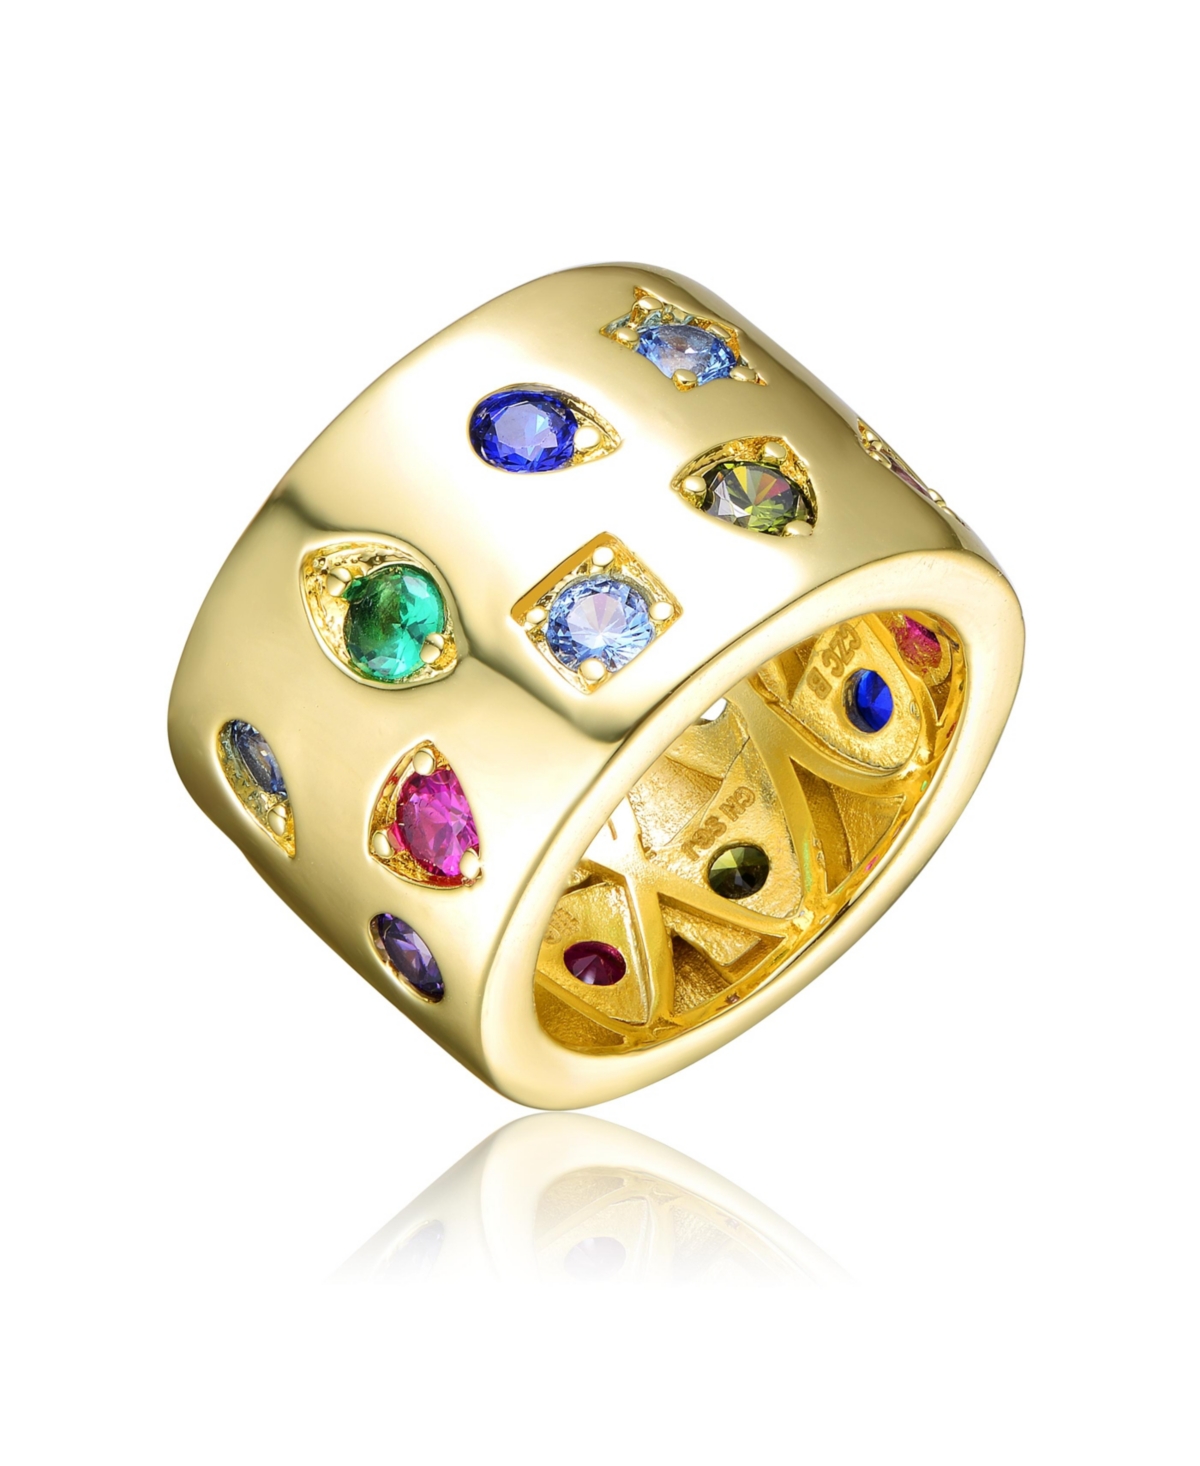 RACHEL GLAUBER RADIANT 14K GOLD PLATED WIDE BAND RING WITH SPOTTED MULTI-COLORED CUBIC ZIRCONIA